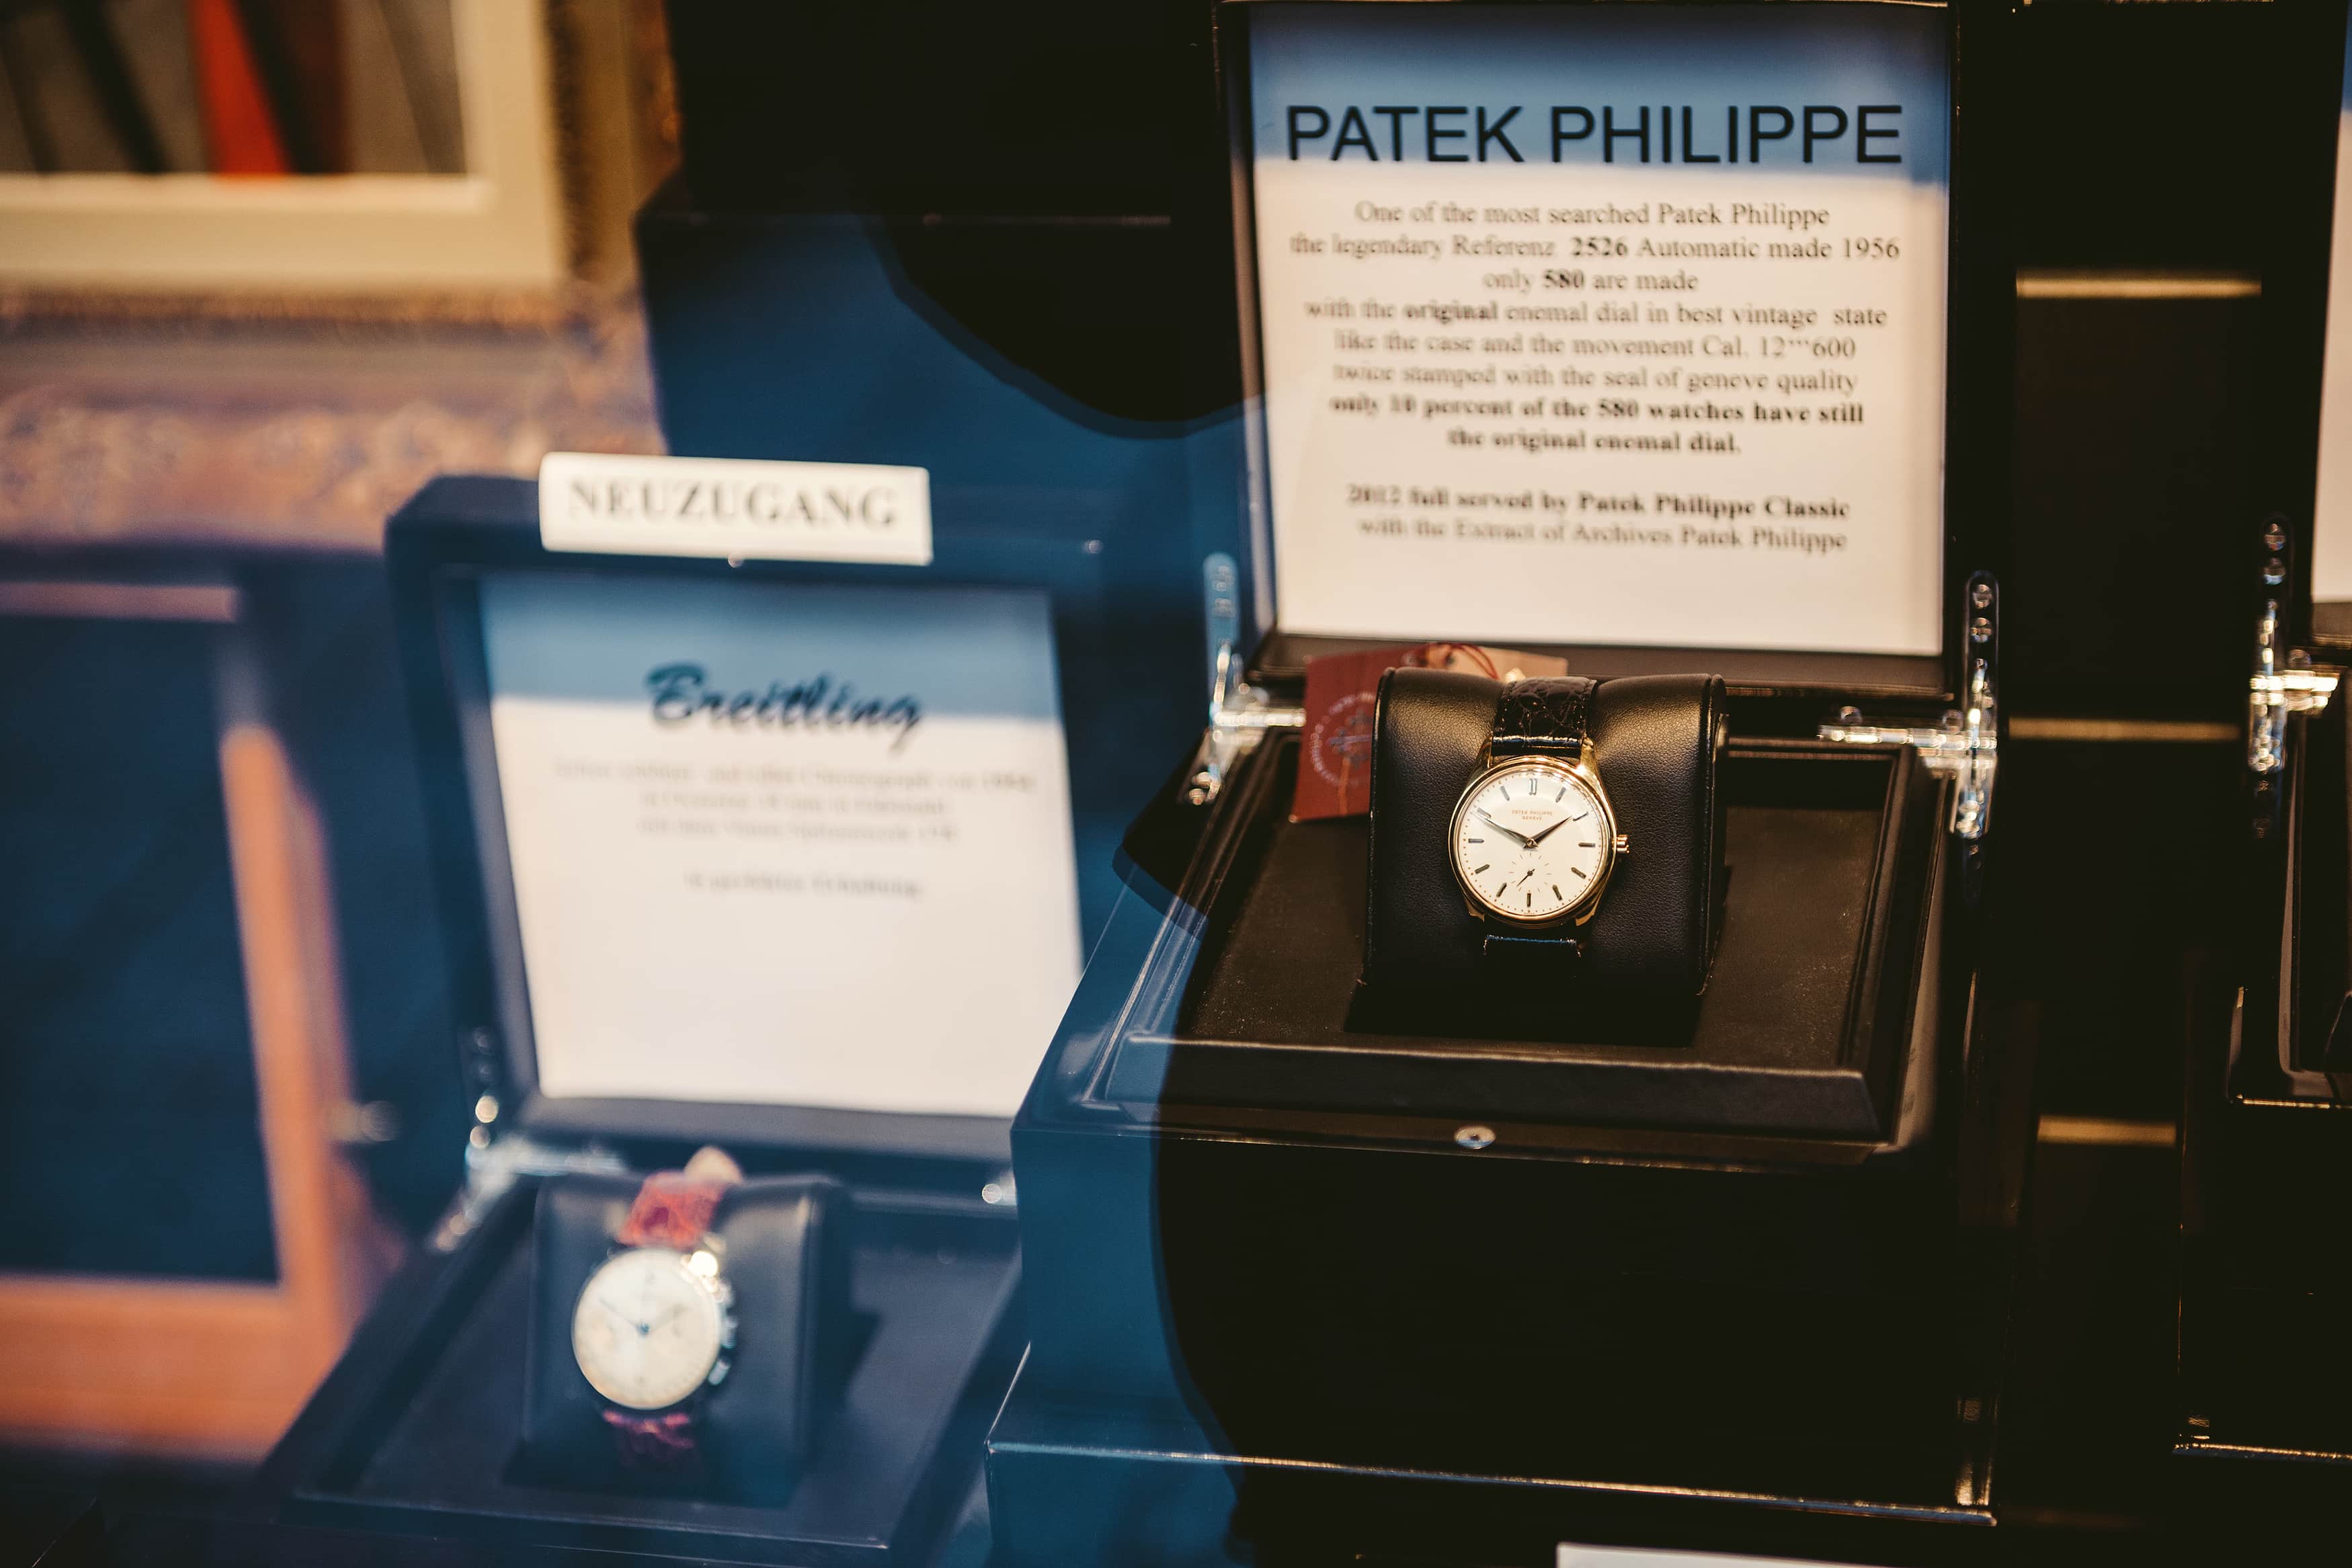 Patek Philippe collections